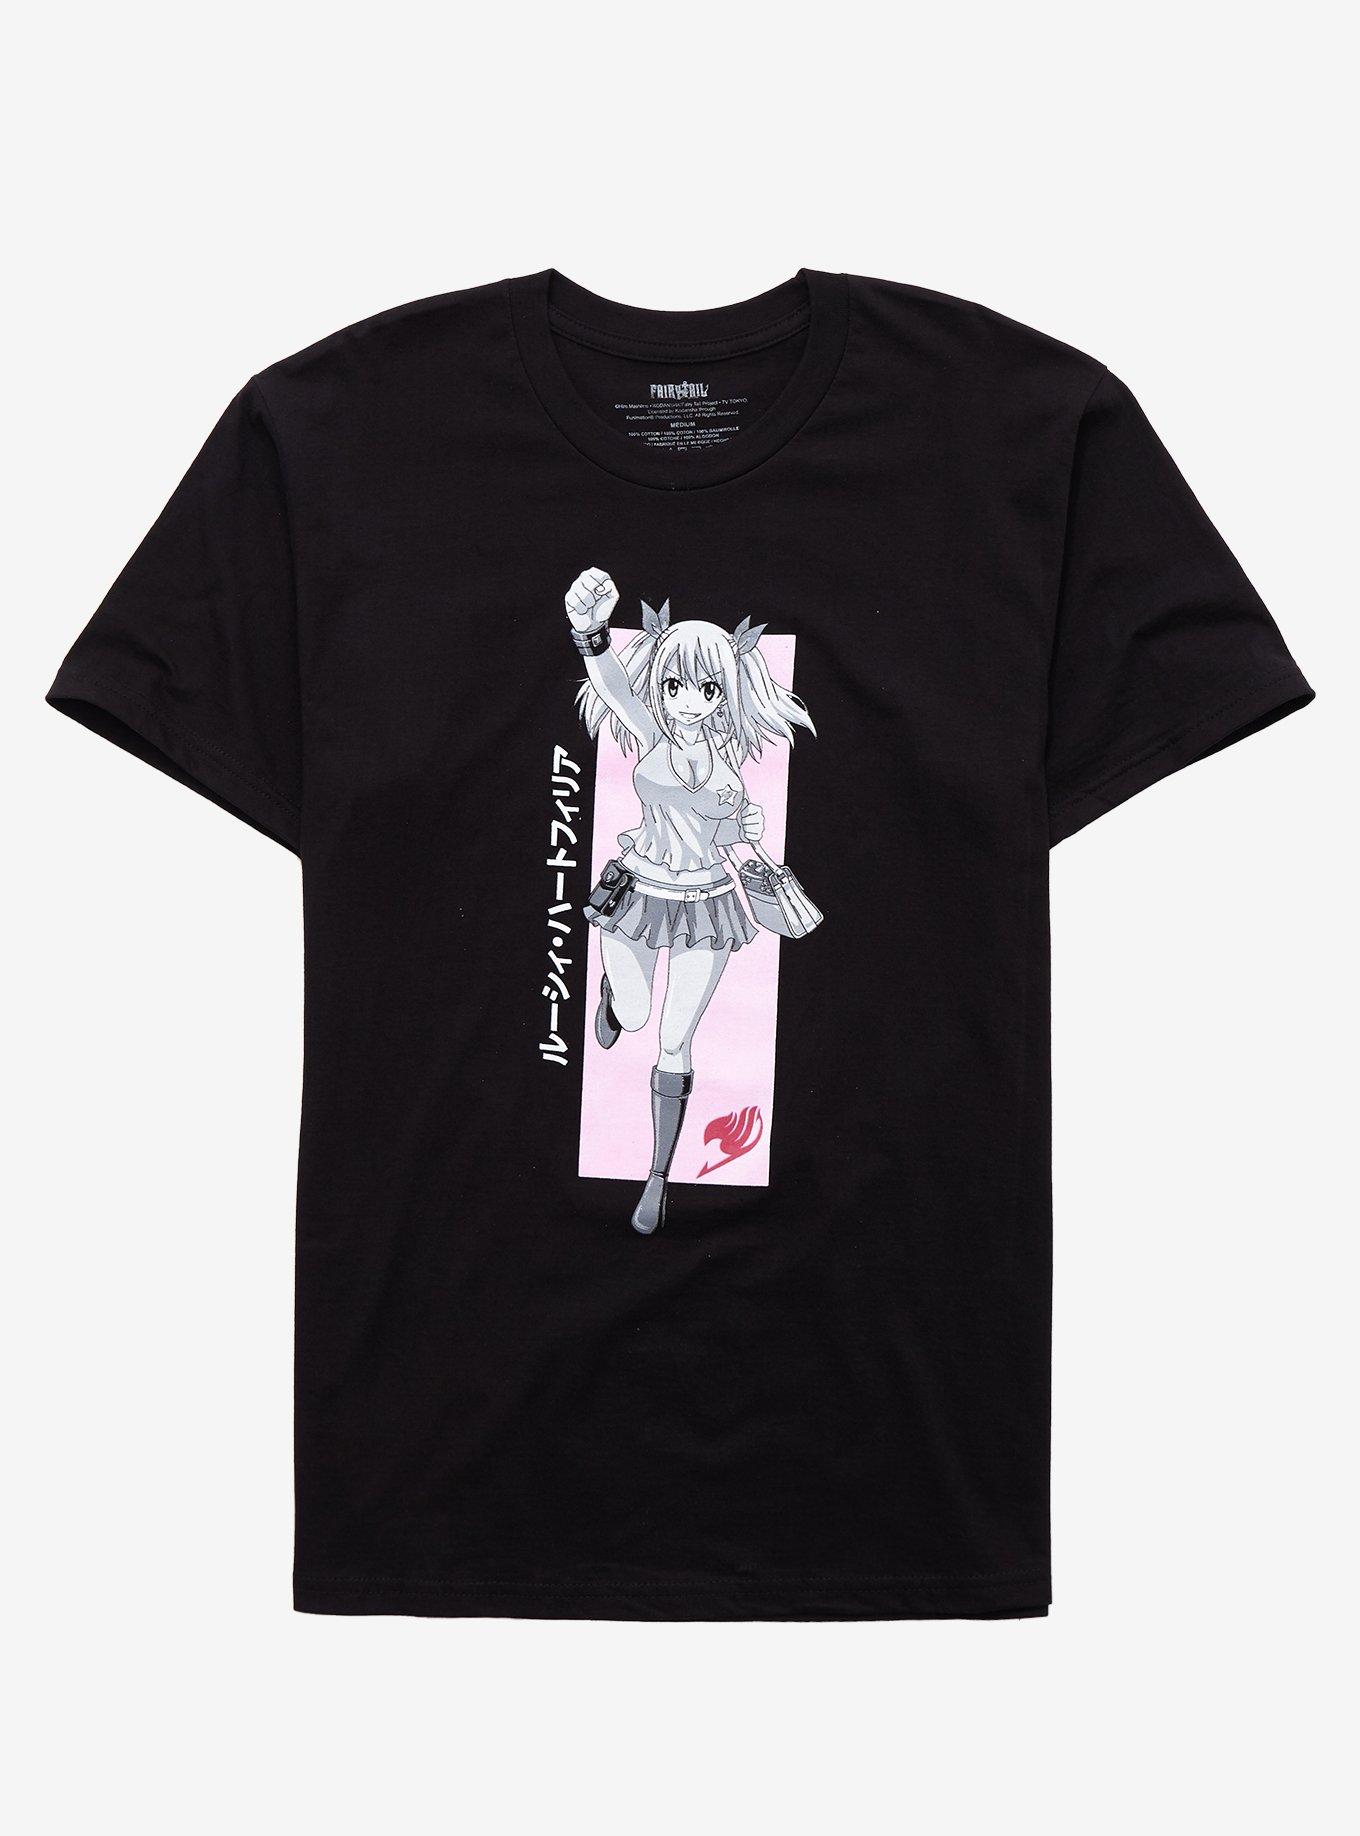 Fairy Tail Lucy Pink Box T-Shirt, BLACK, hi-res